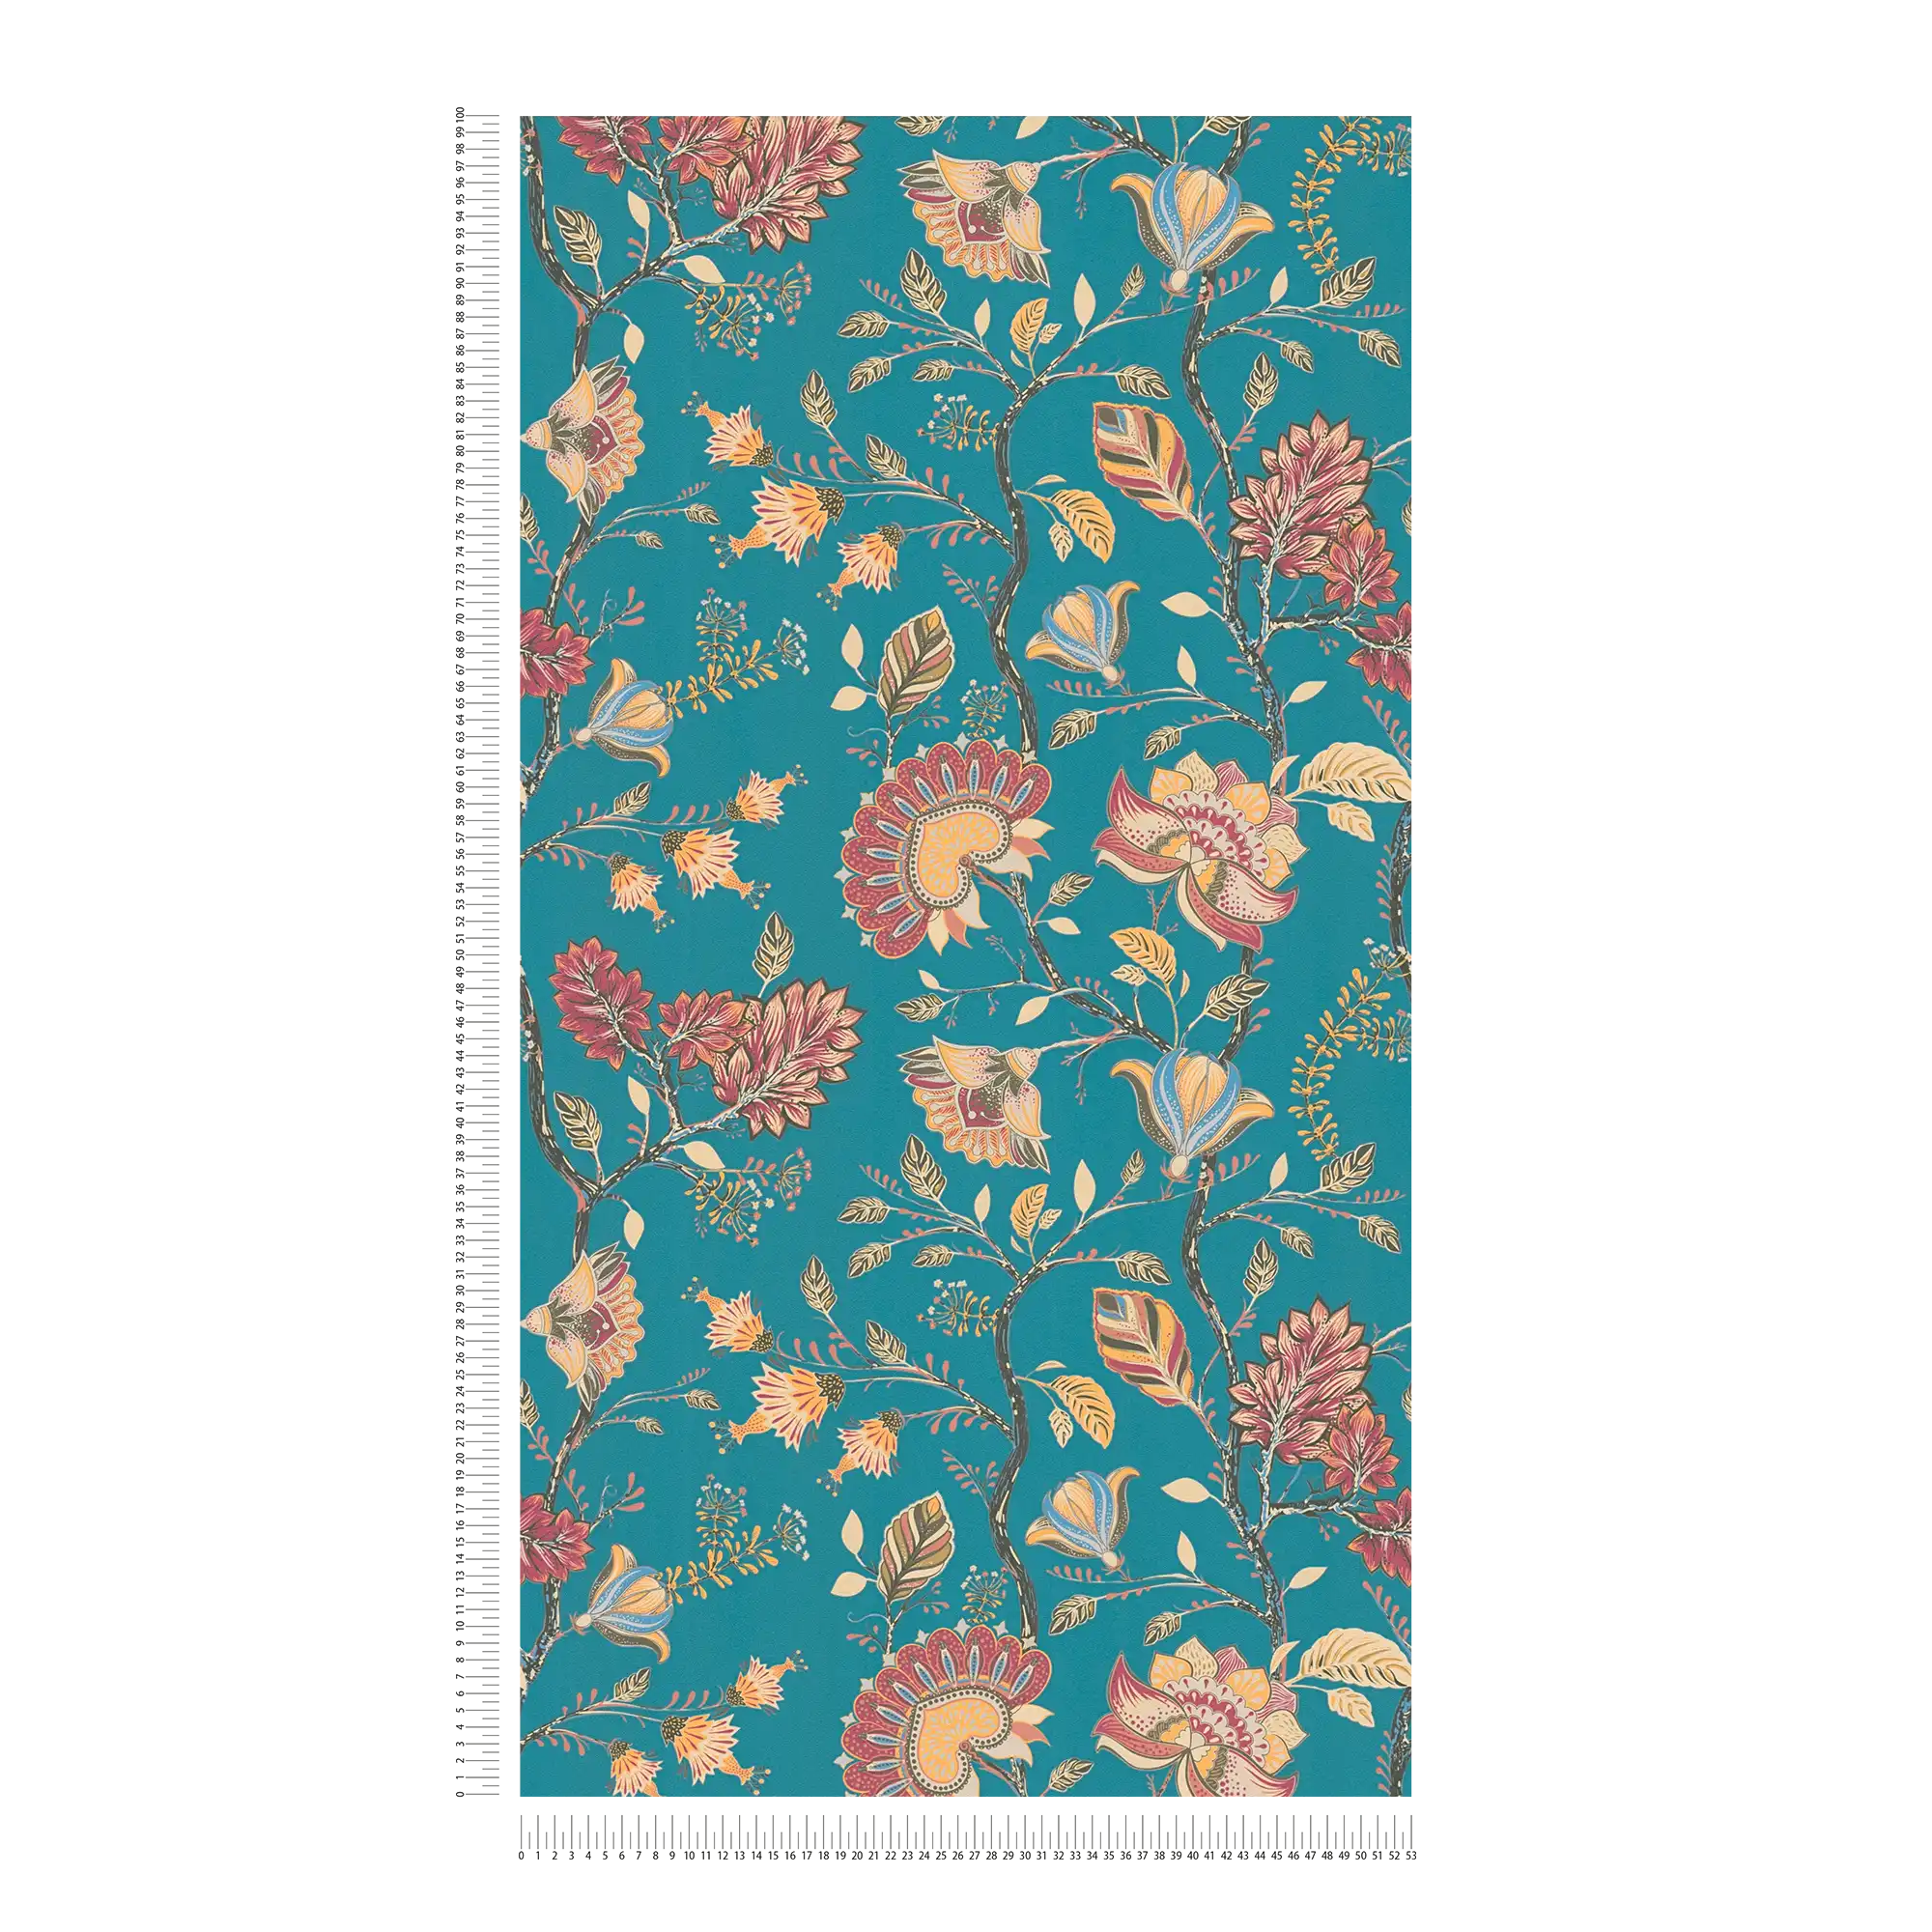             Non-woven wallpaper with floral colourful pattern - blue, yellow, red
        